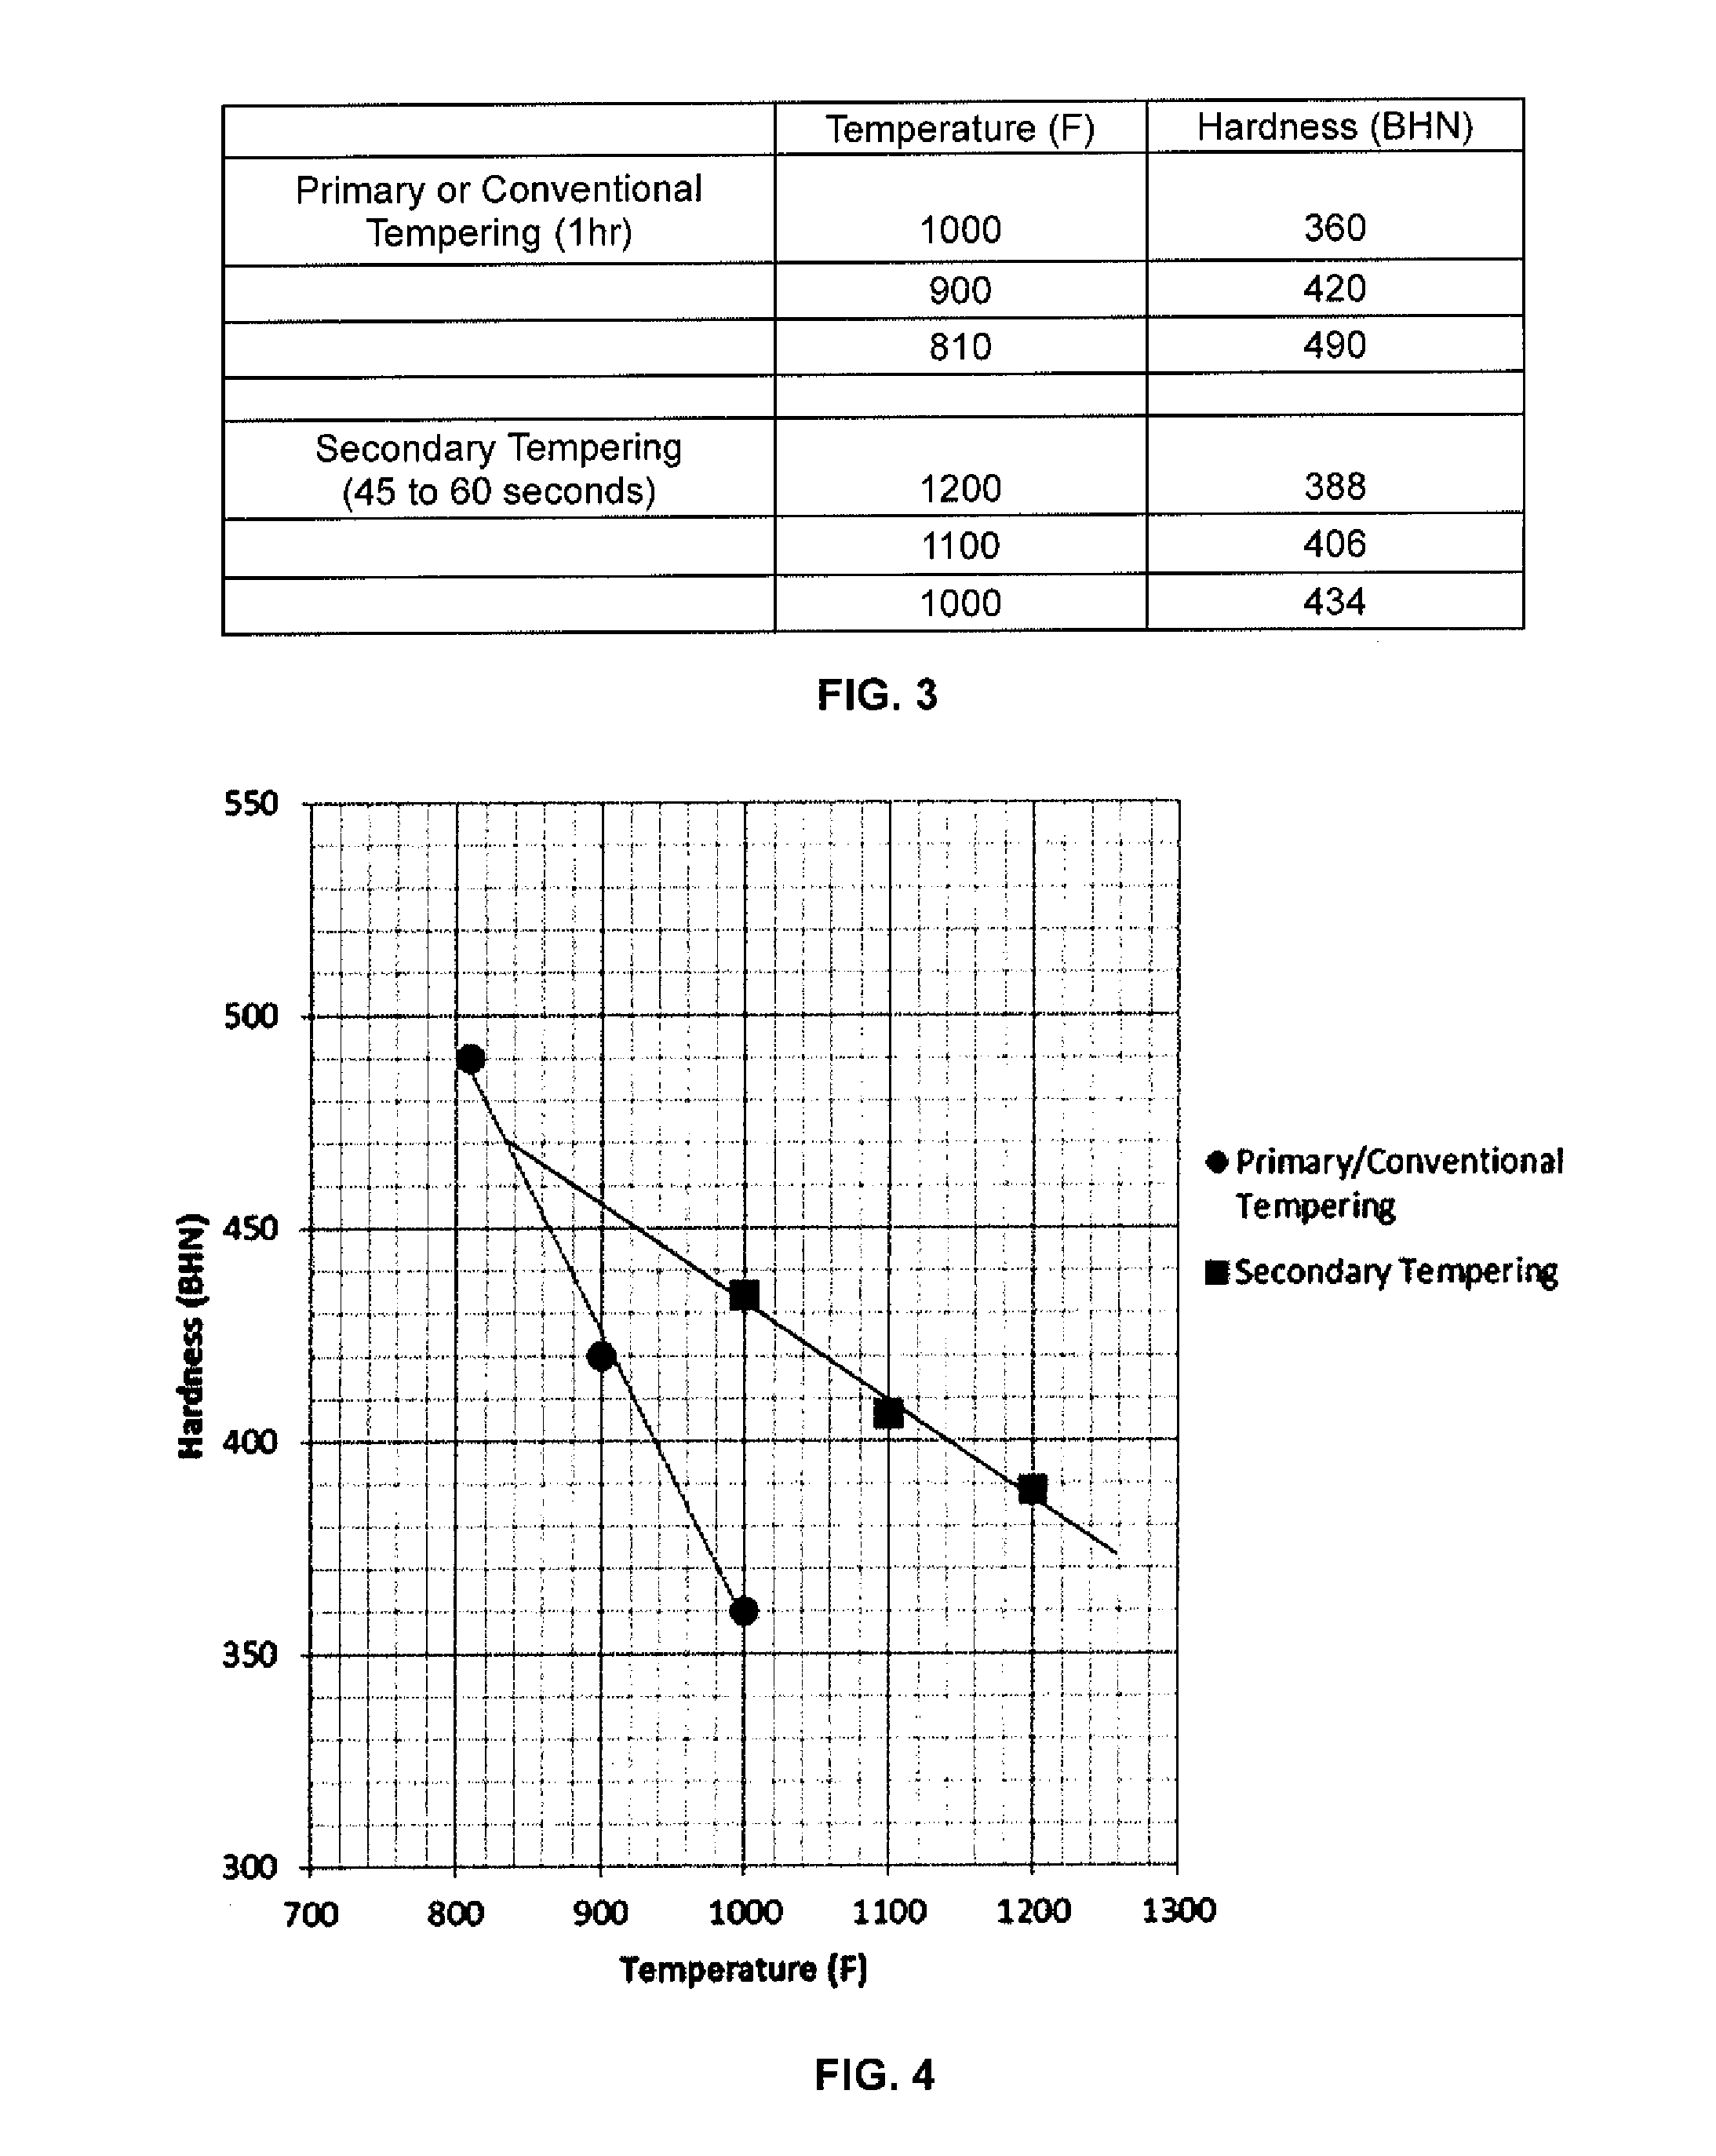 Leaf spring and method of manufacture thereof having sections with different levels of through hardness